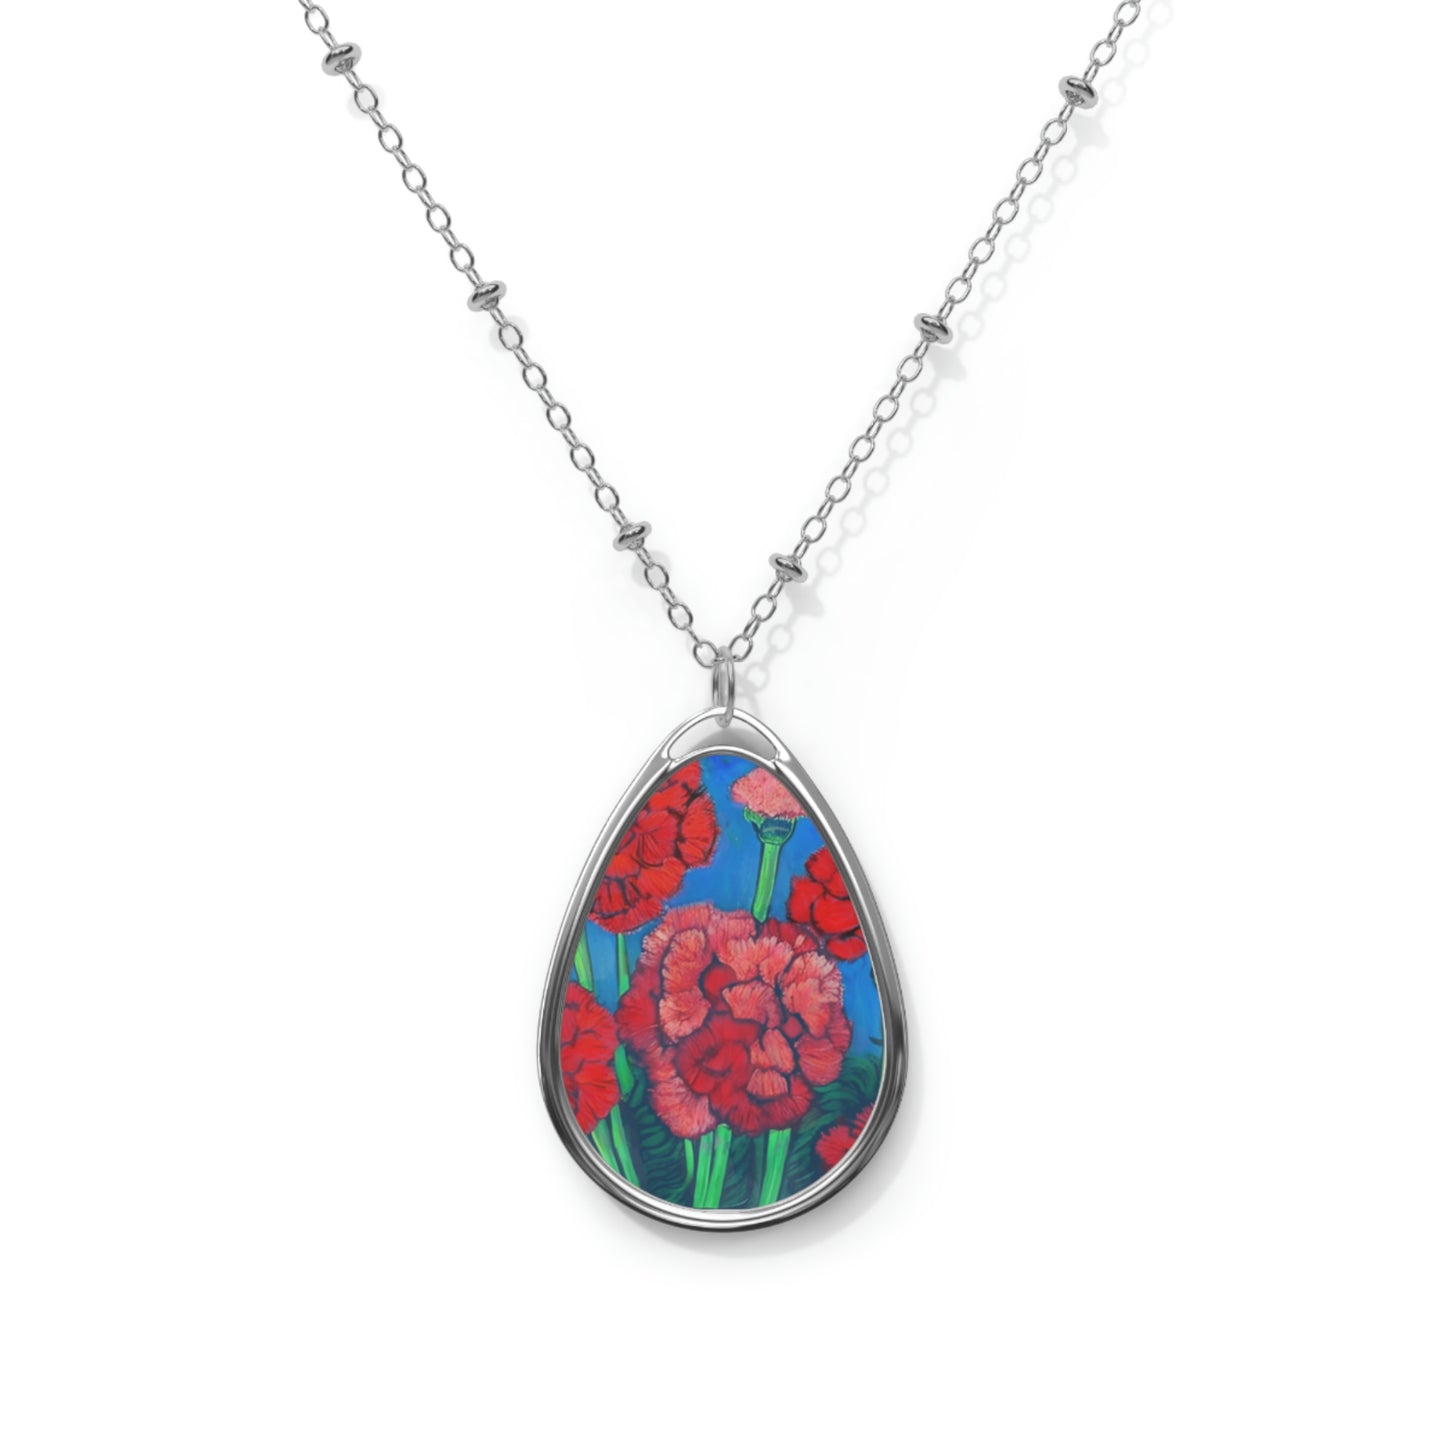 Art of Mari Accessories, Carnation necklace